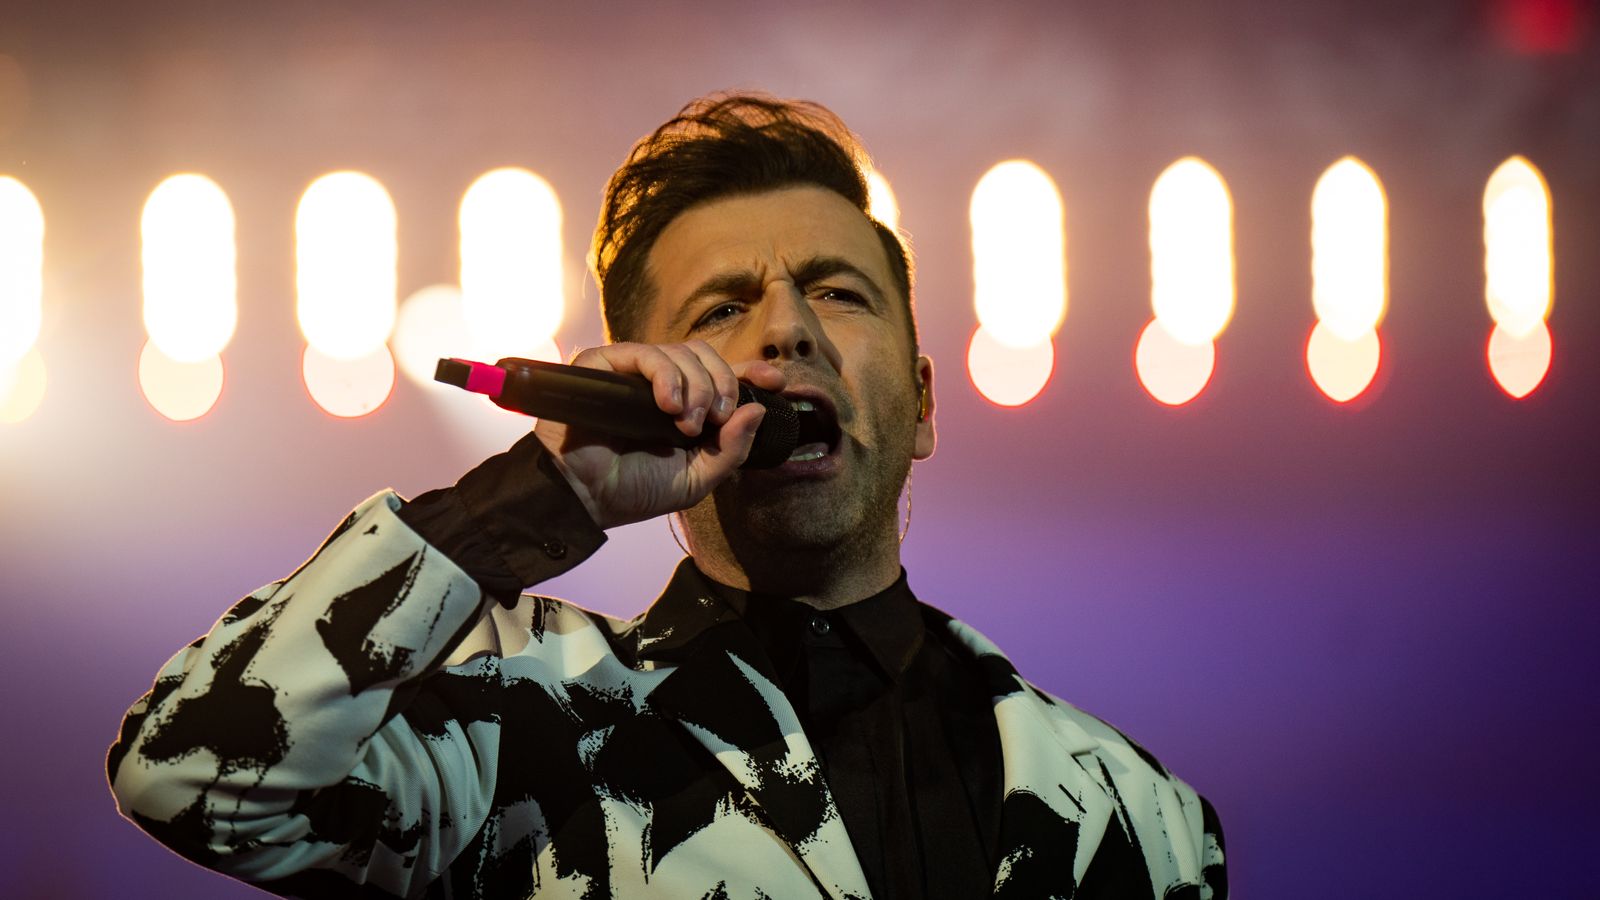 Westlife singer Mark Feehily pulls out of tour due to 'health challenges'